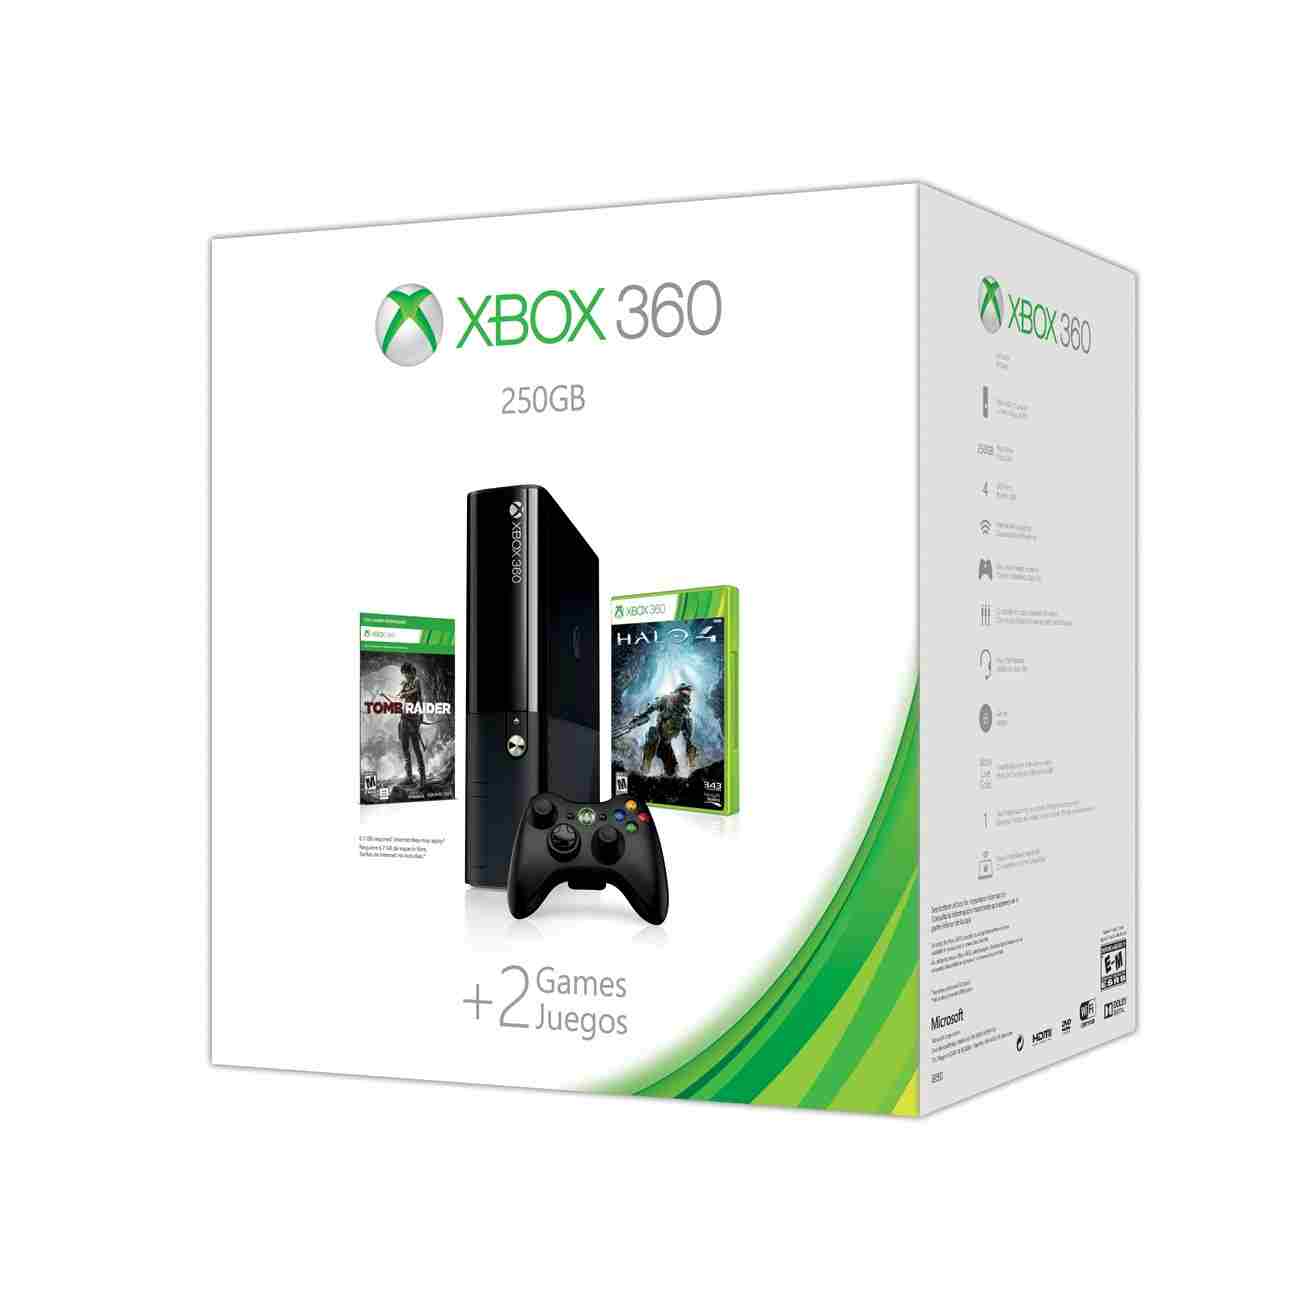 What is in Xbox 360 package